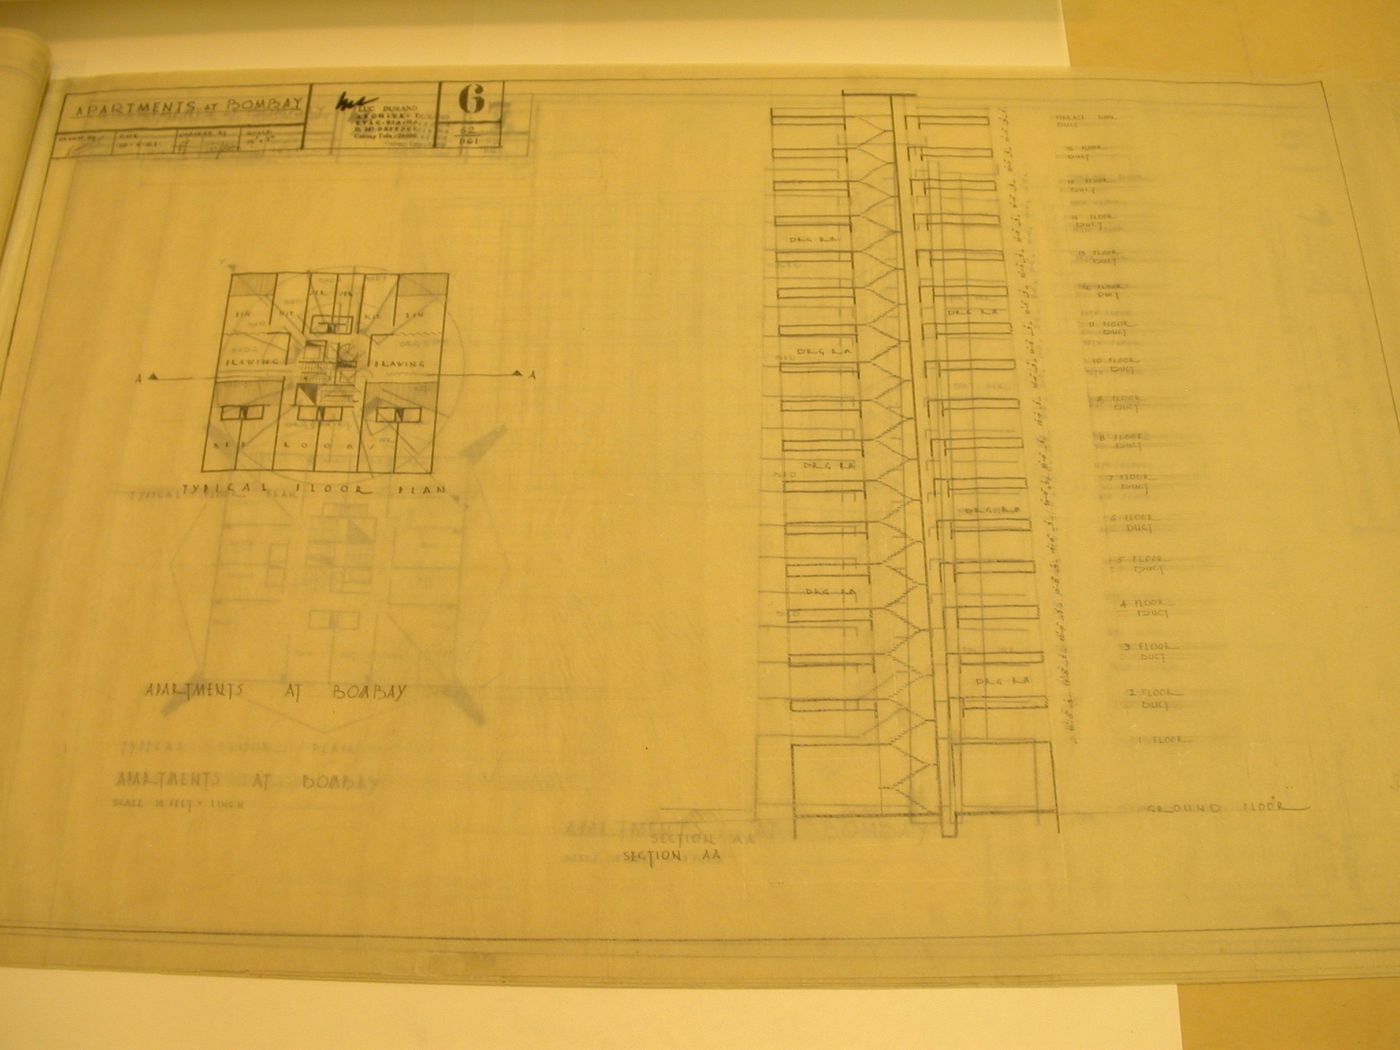 Complexe d'habitation Gary Coopar, "Apartments at Bombay", Bombay (maintenant Mumbai), Inde: floor plan and section